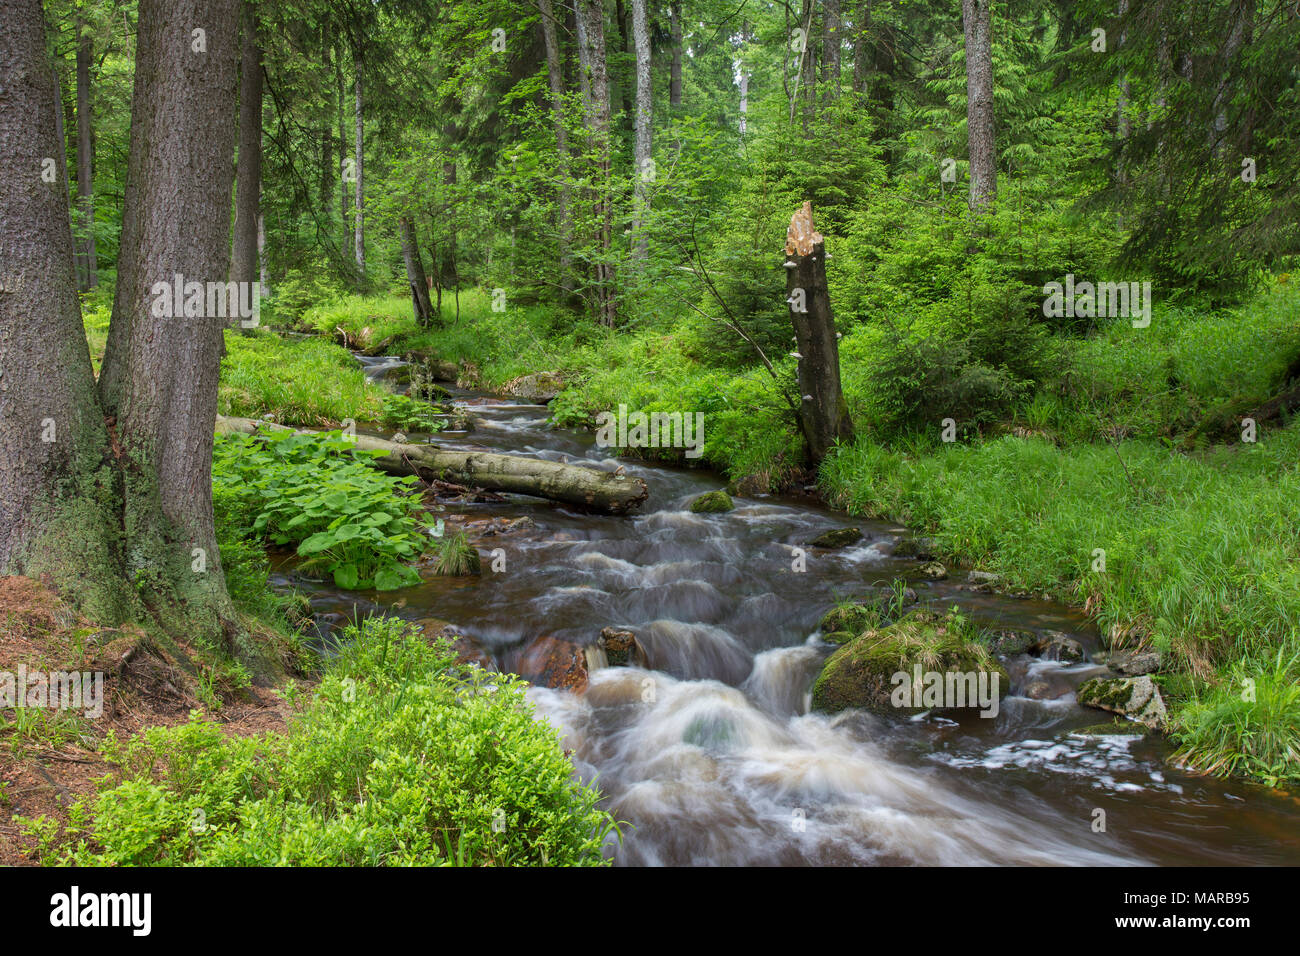 Warme Bode, headstream of the river Bode. High Harz Mountains, Lower Sacony, Germany Stock Photo